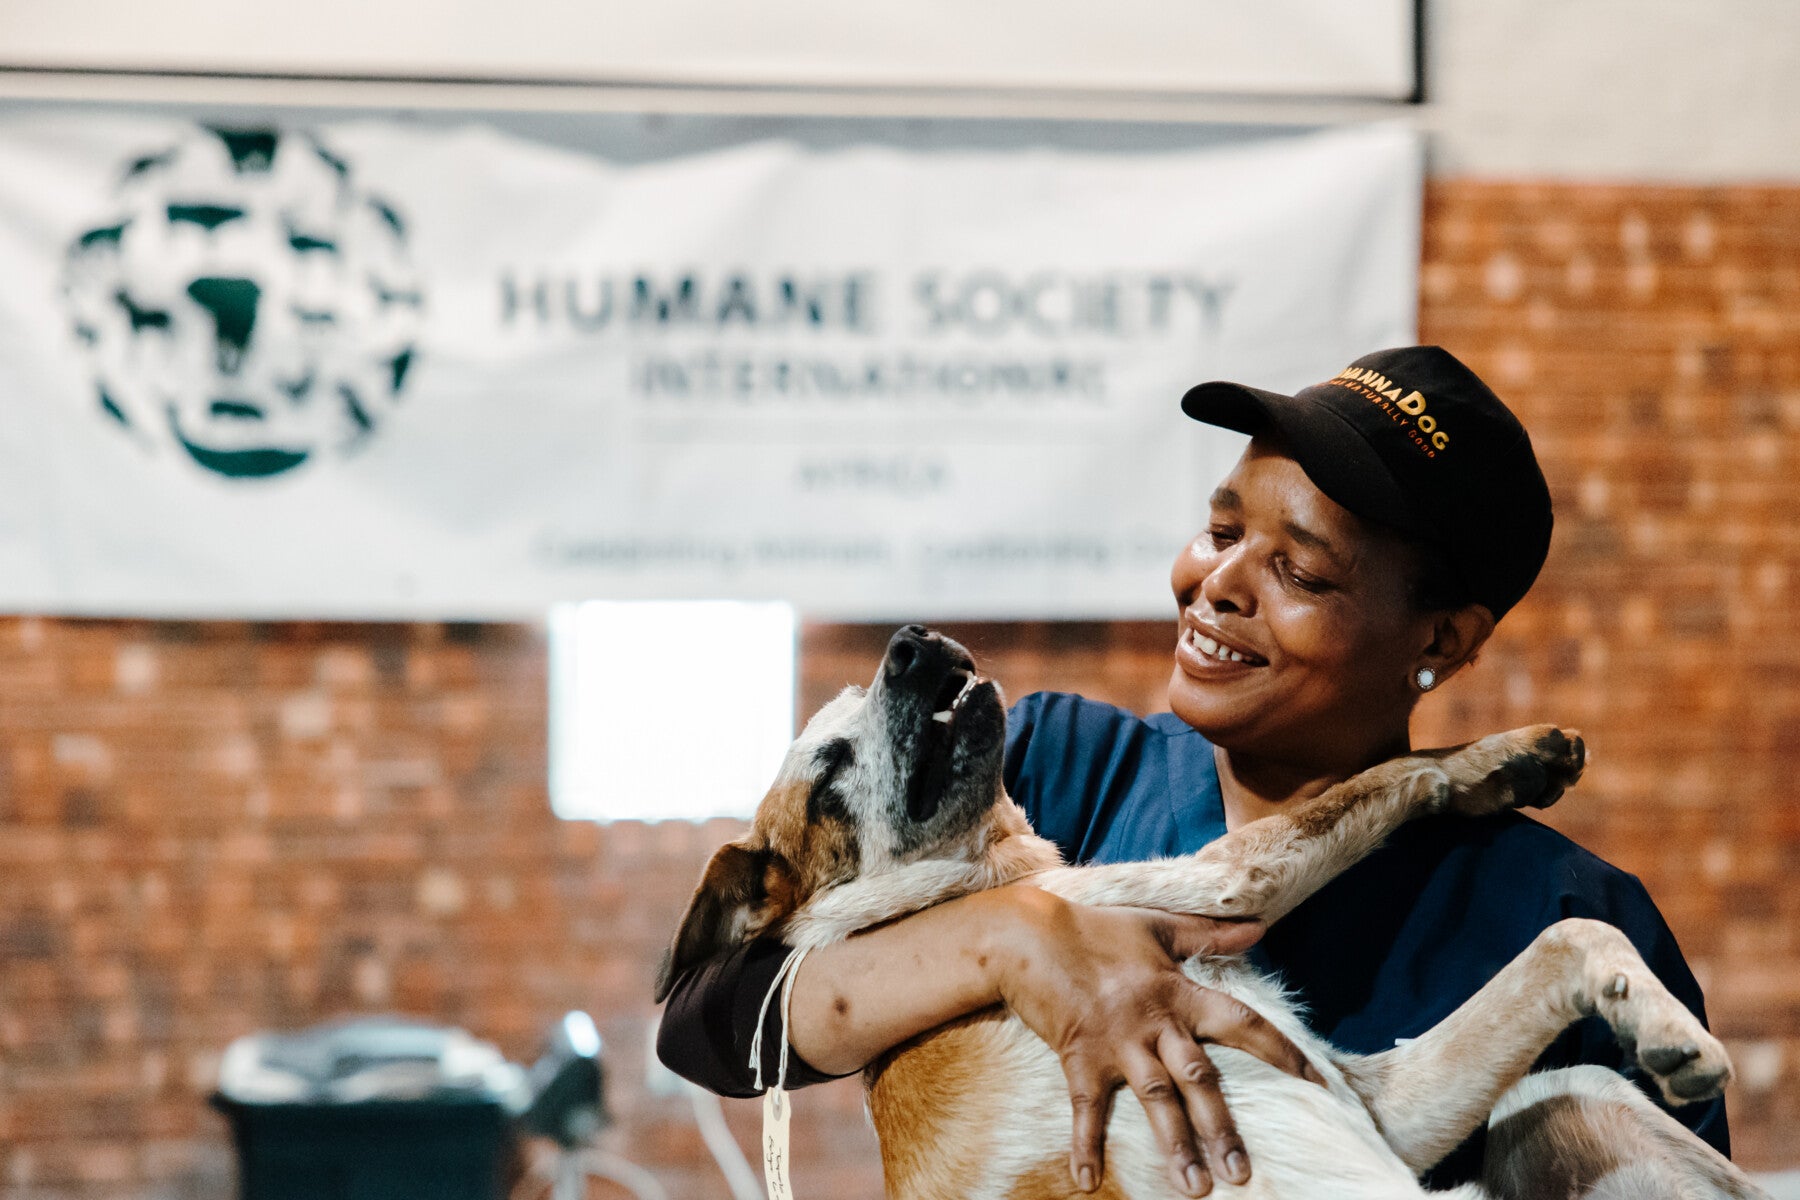 Healthy Pets, Healthier Community program launches in Struisbraai and Bredasdorp, helping hundreds of dogs and cats